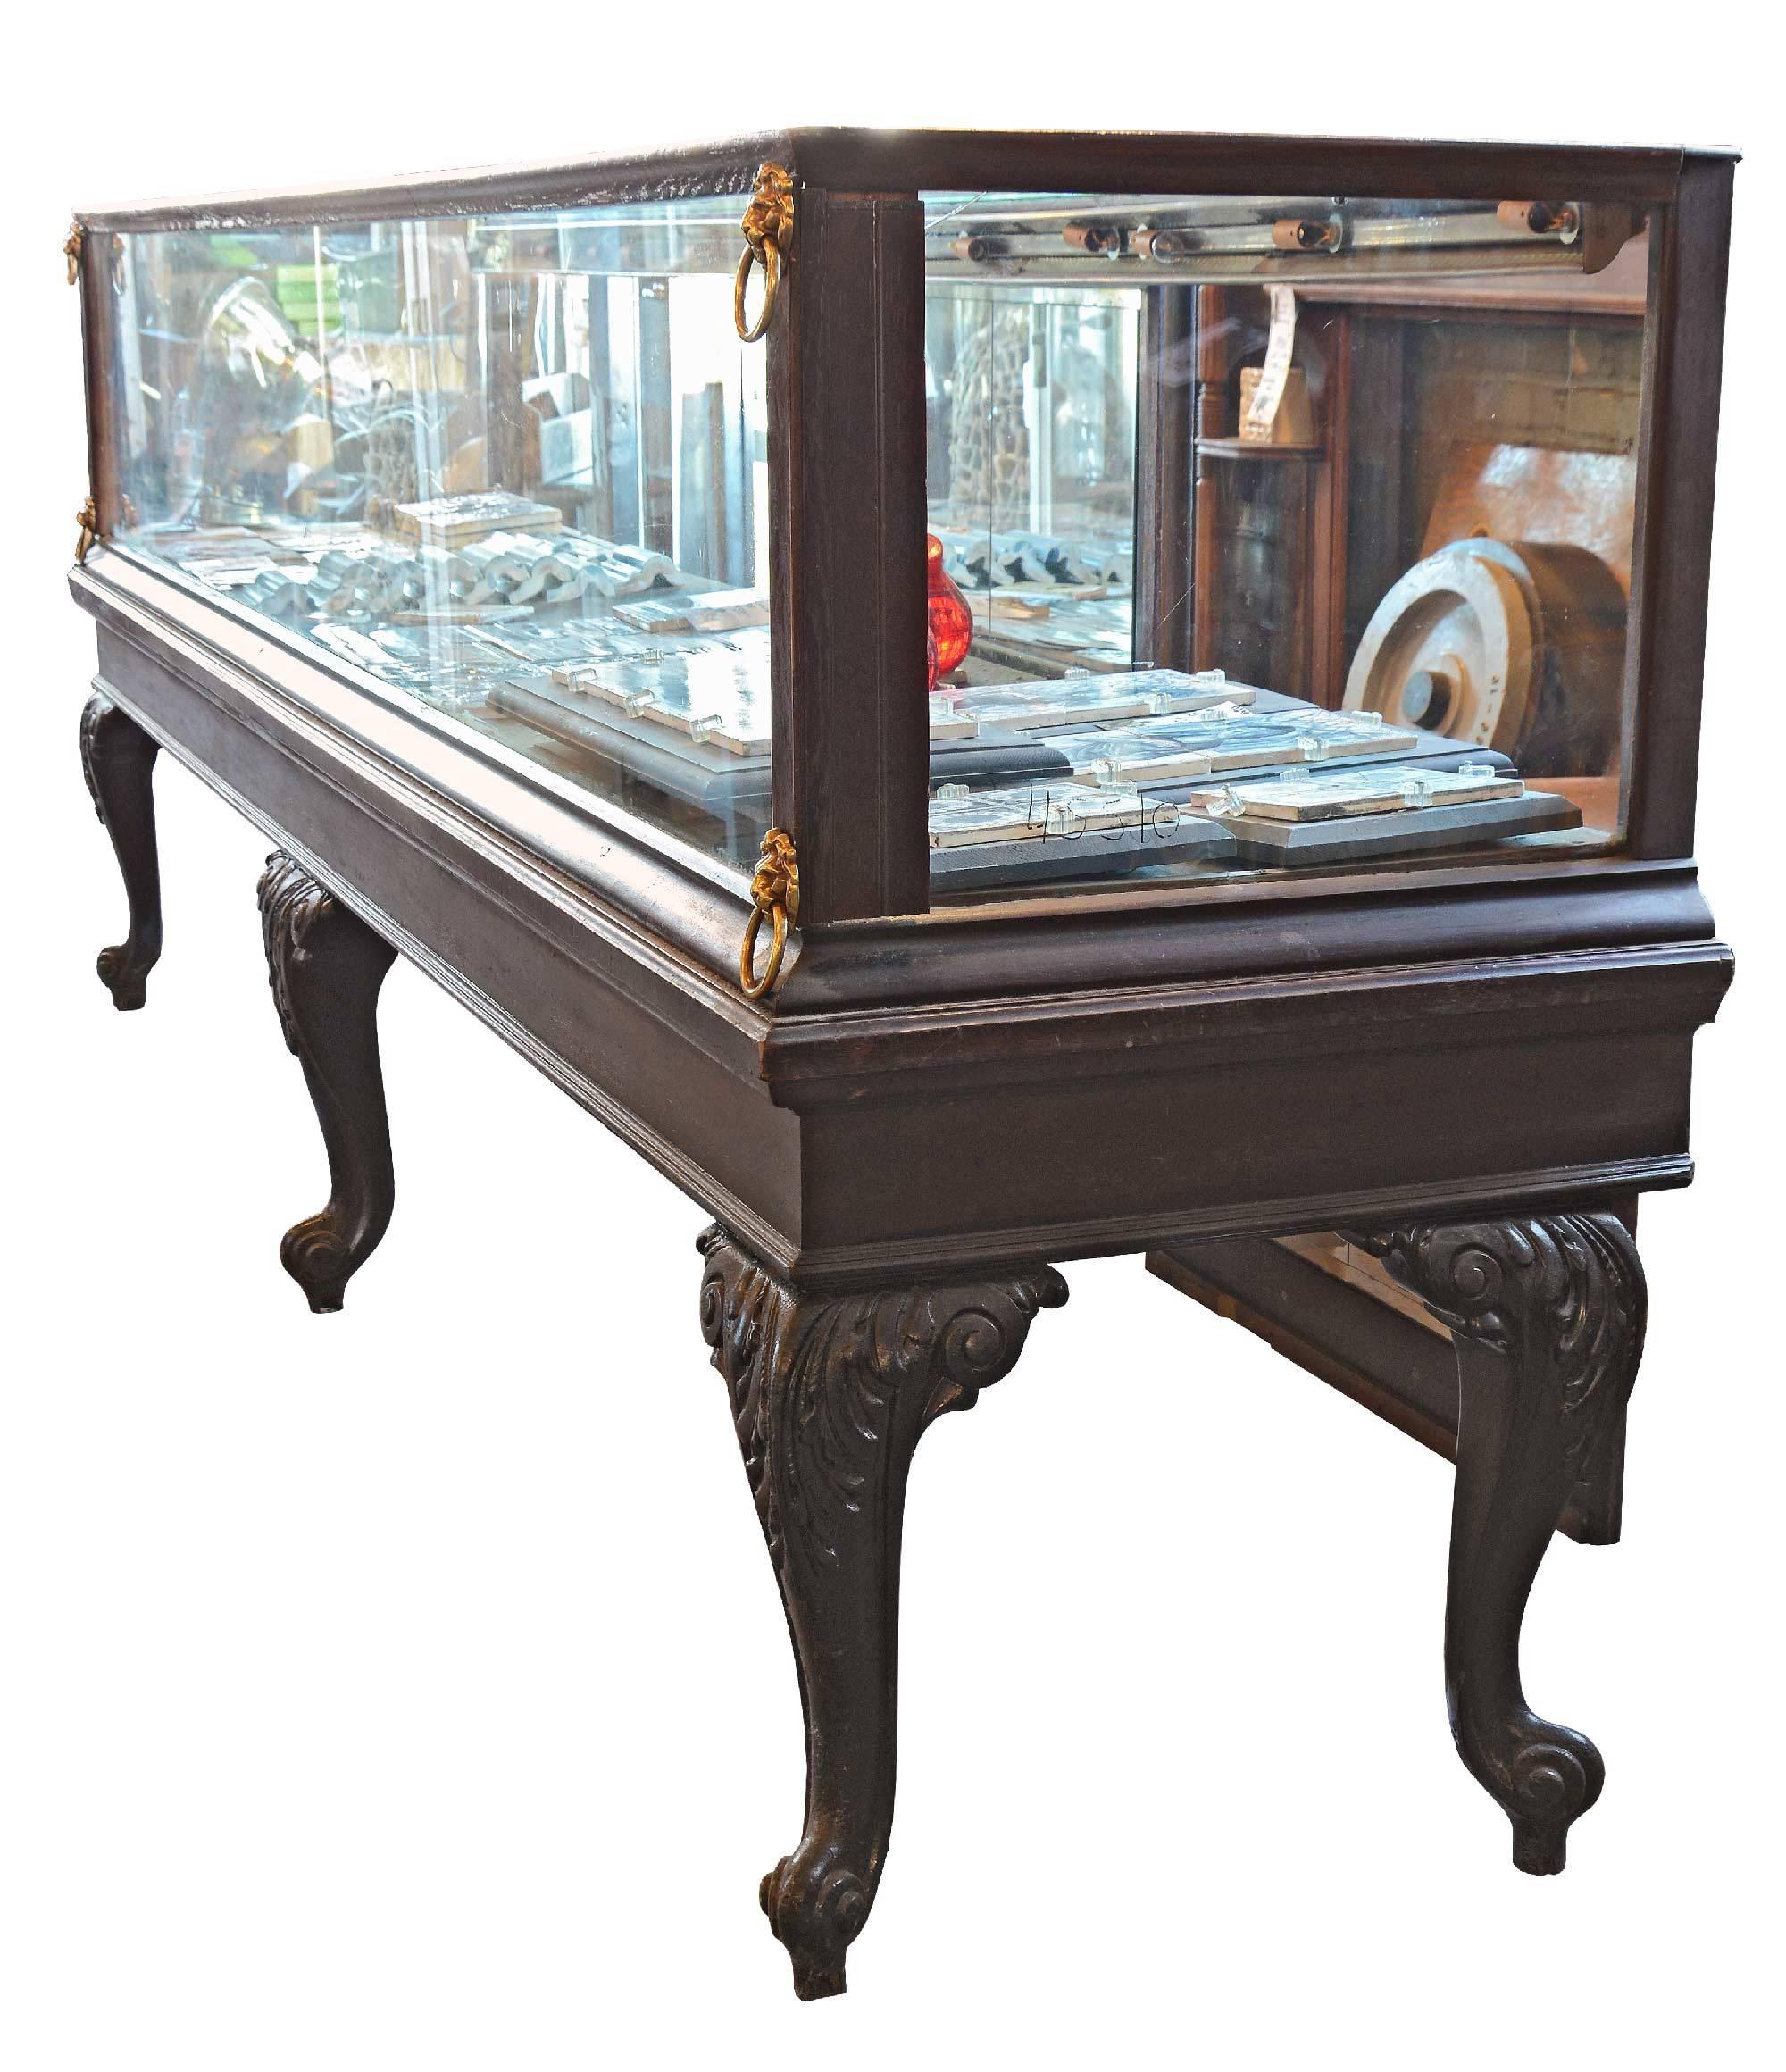 Early 20th Century Mahogany Display Case with Glass Lions, circa 1910